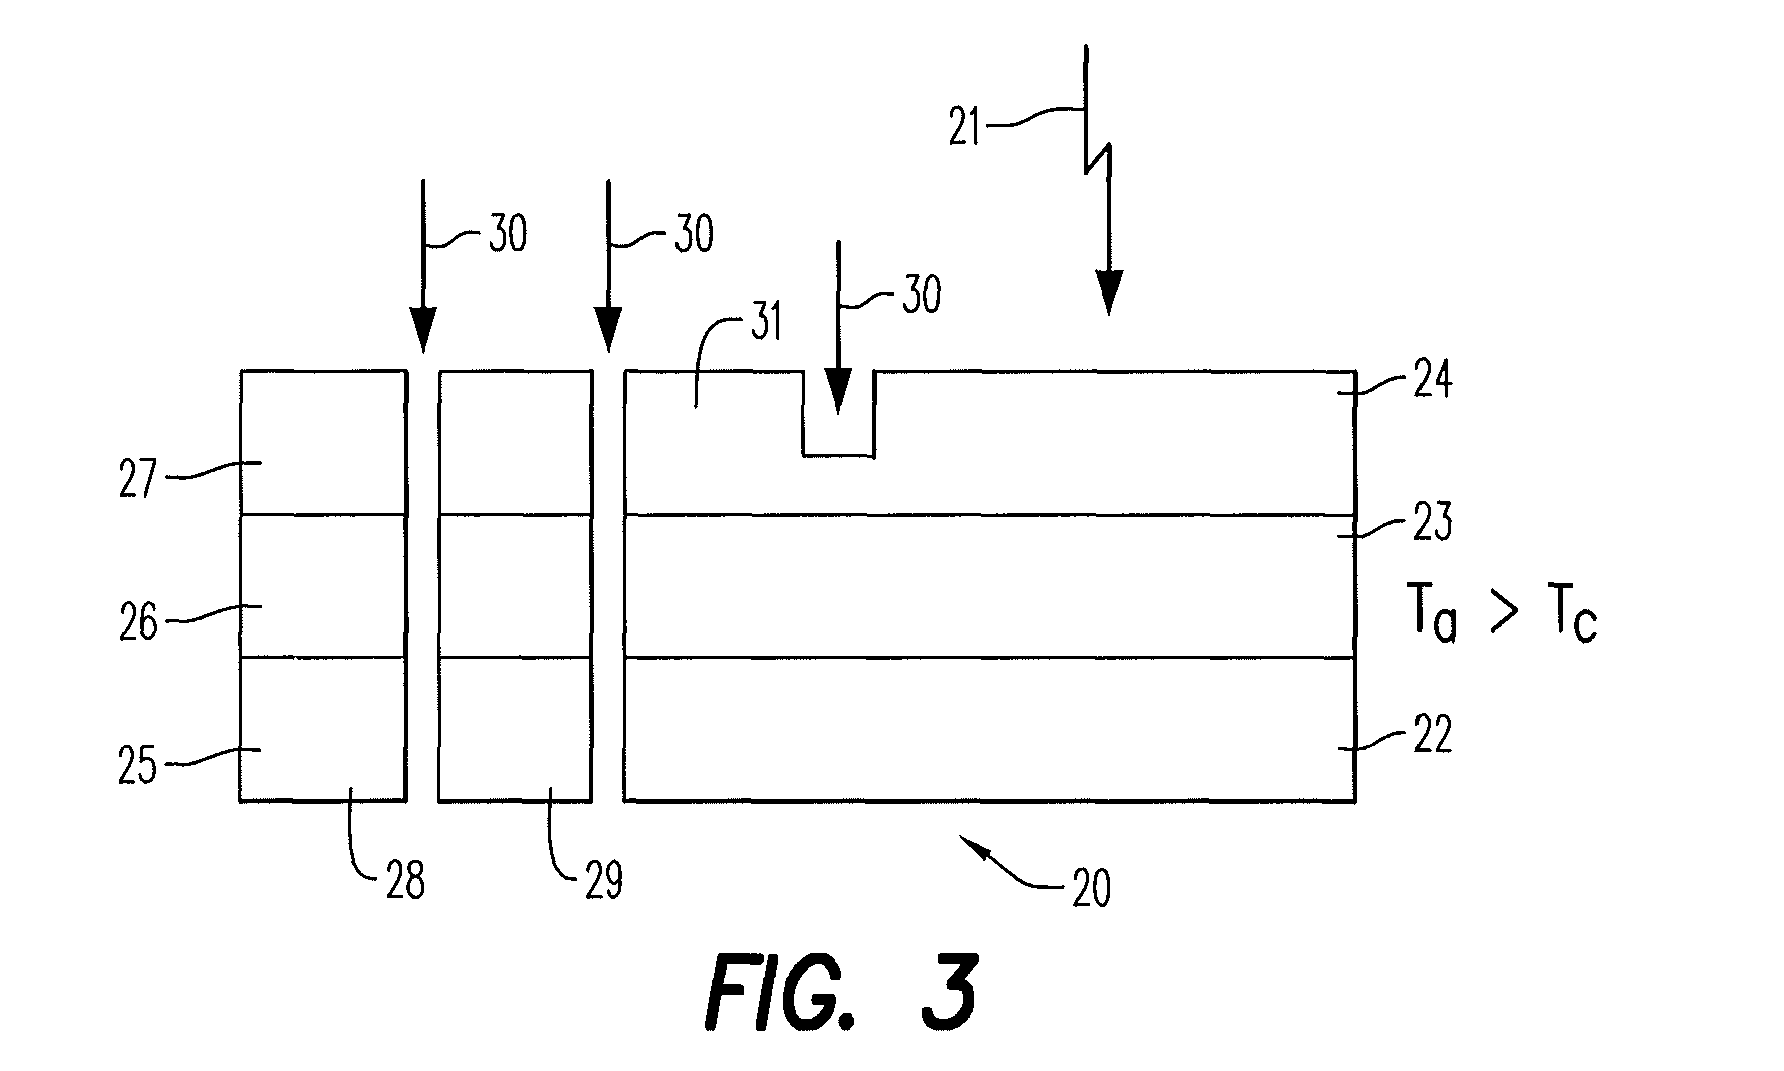 Article comprising at least one magnetocalorically active phase and method of working an article comprising at least one magnetocalorically active phase